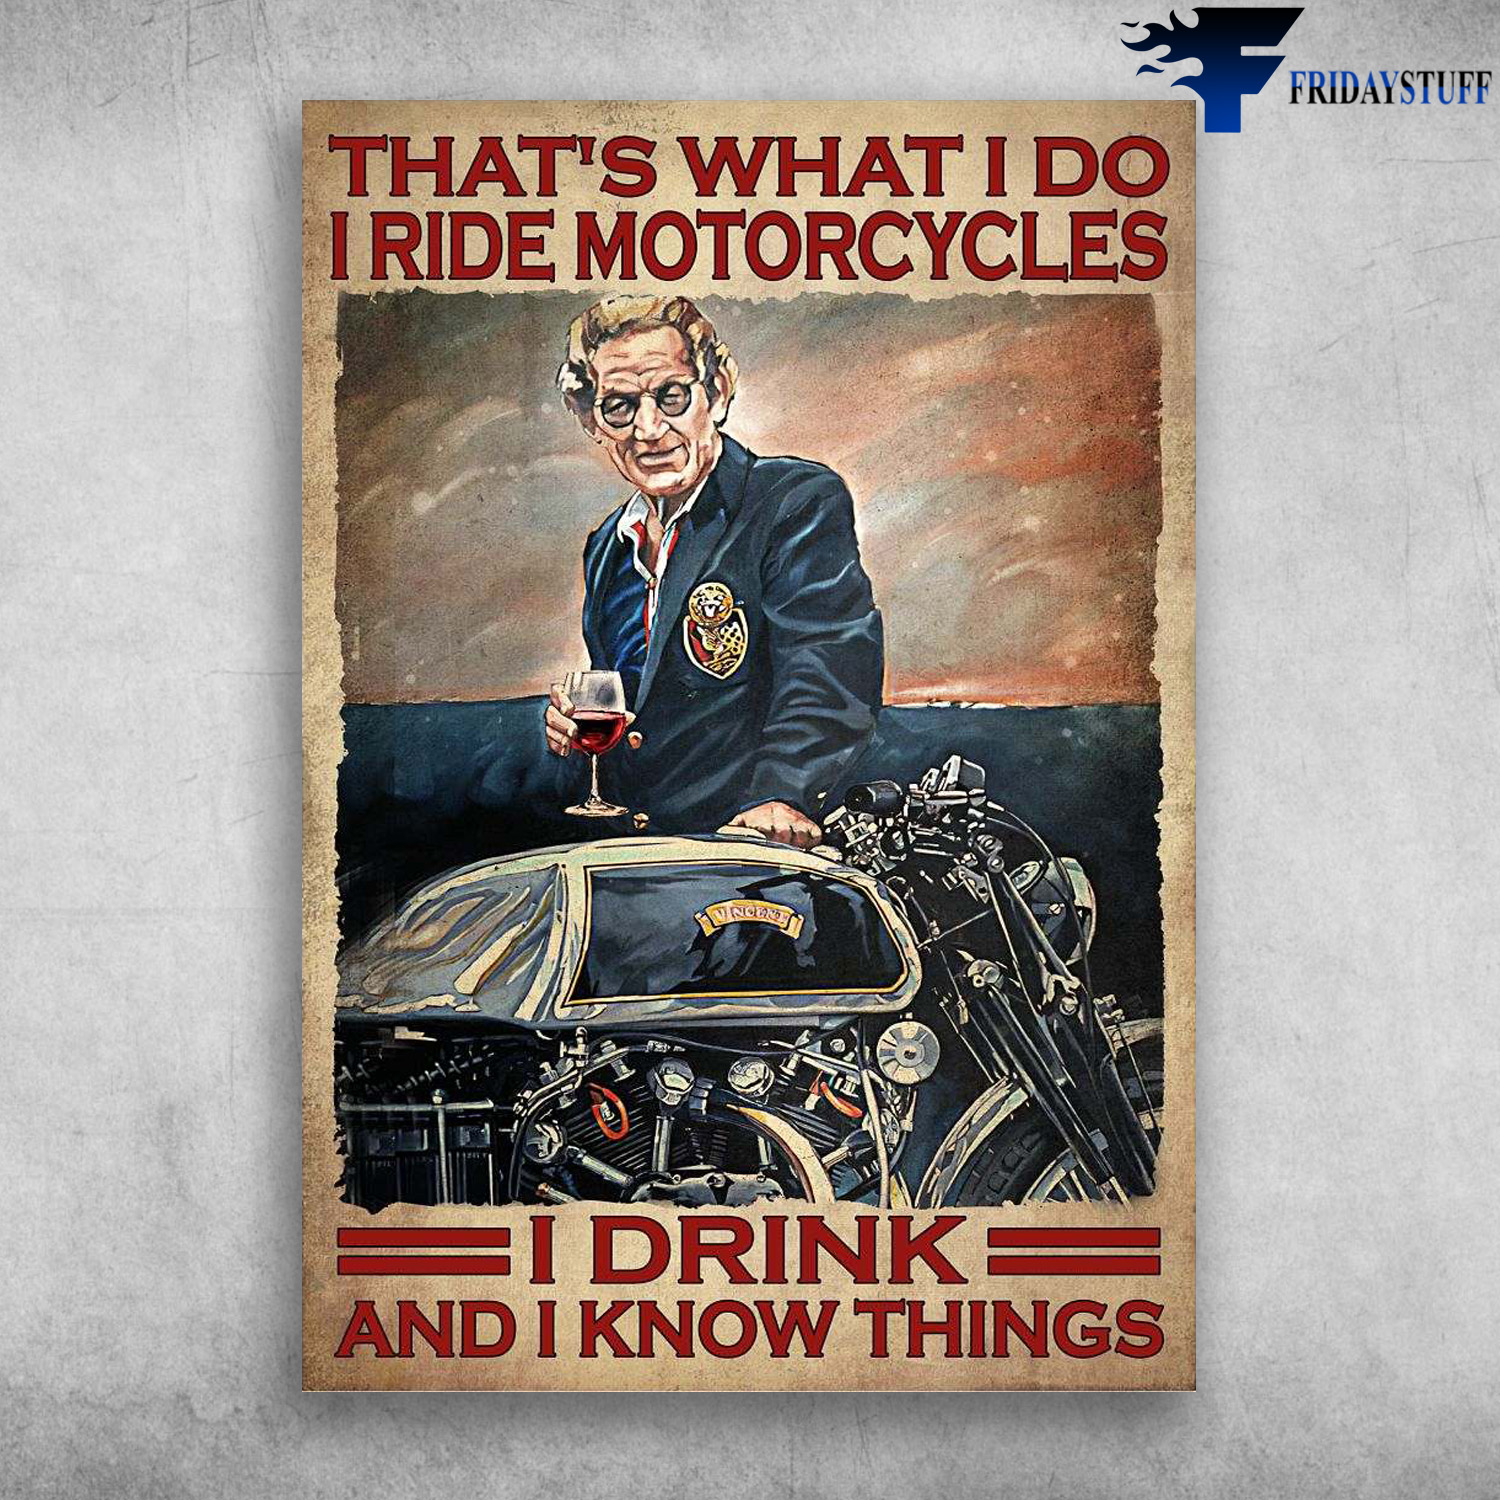 Old Man Motorcycle, Wine And Motorcycle - That's What I Do, I Ride Motorcycles, I Drink, And I Know Things